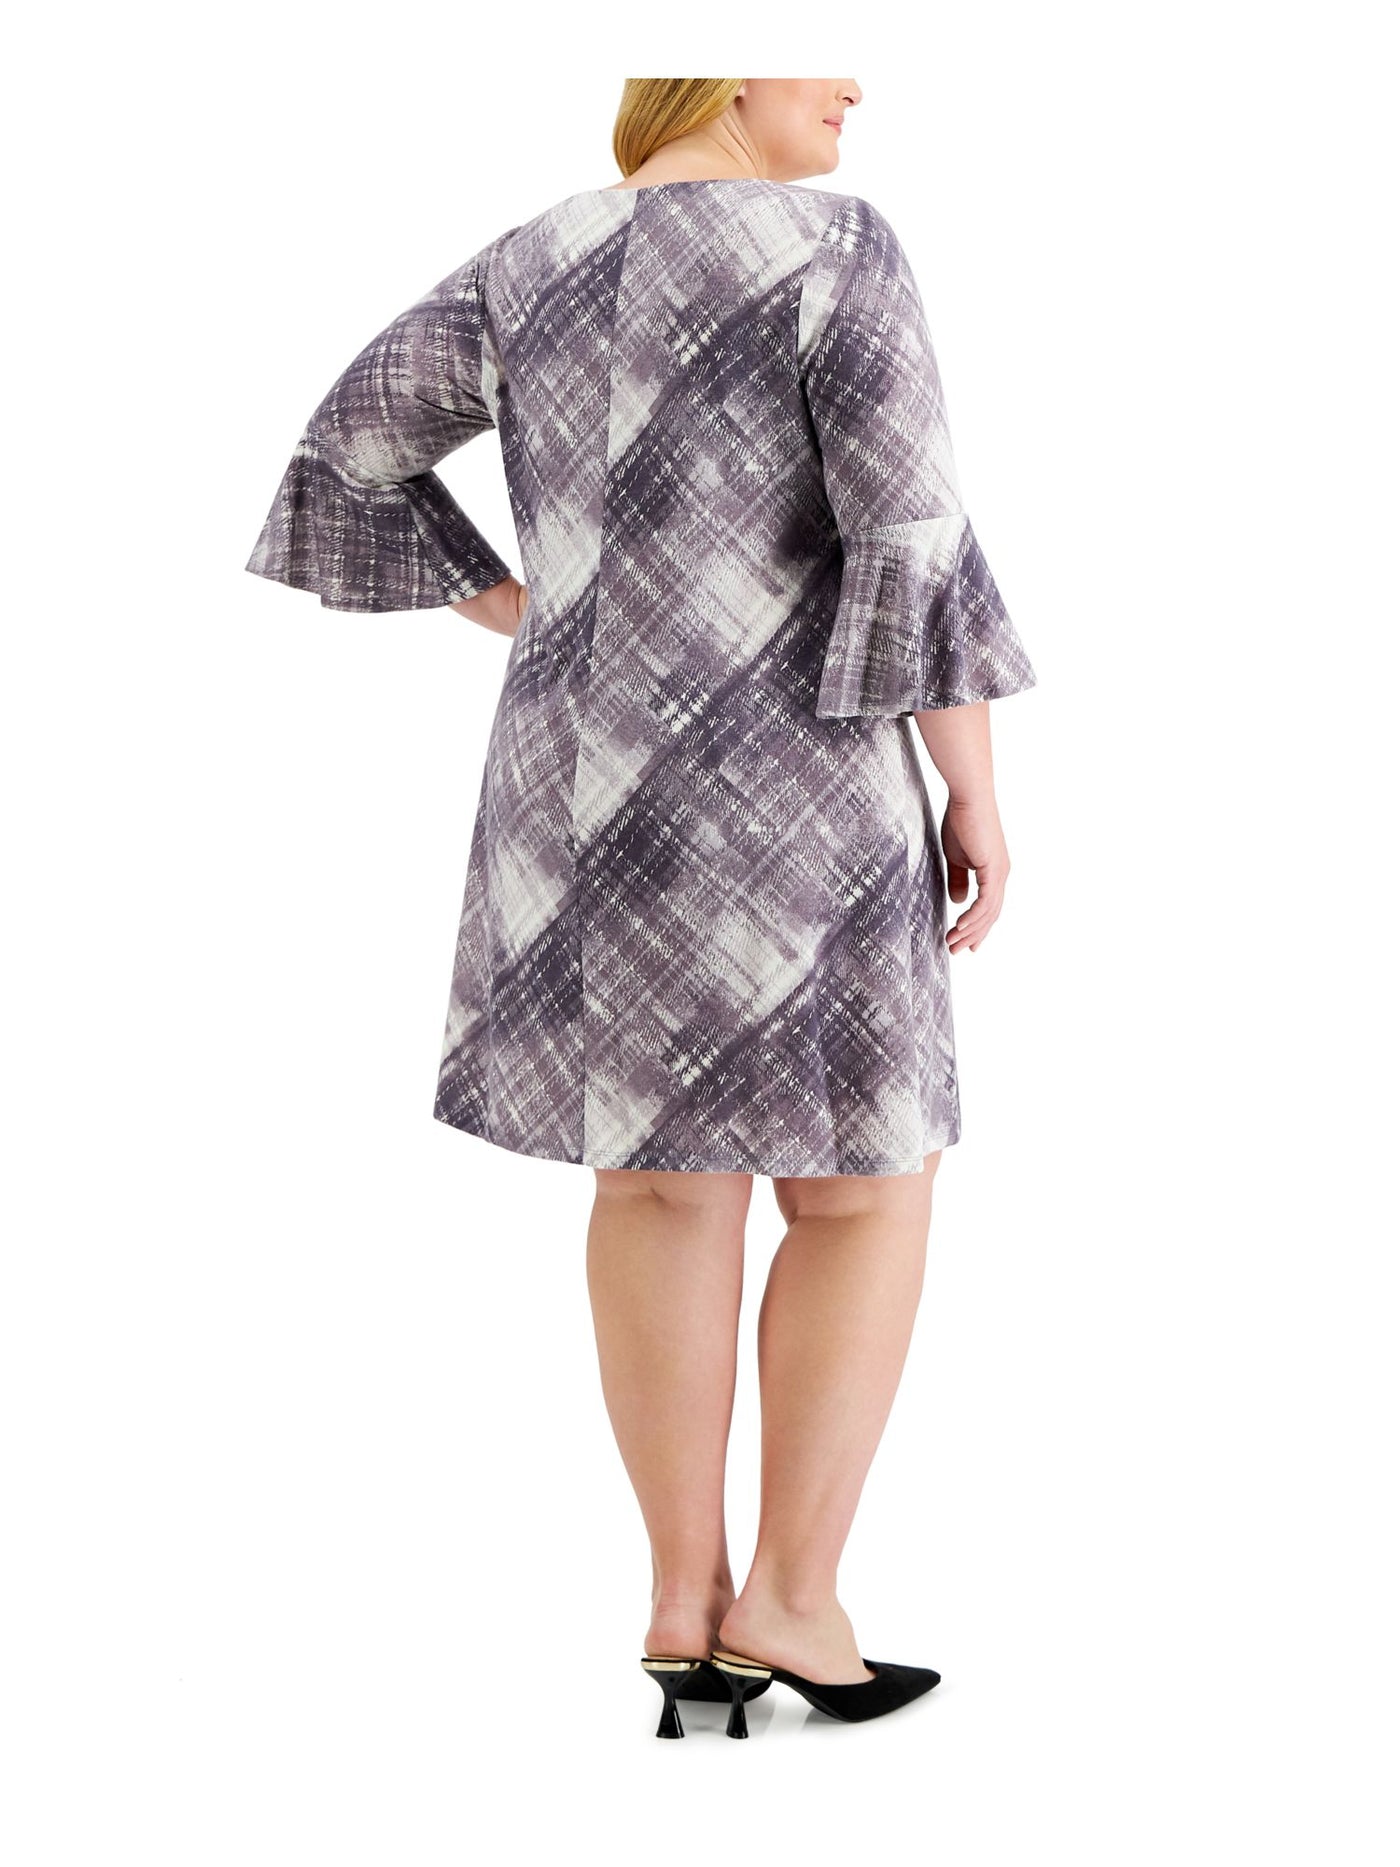 CONNECTED APPAREL Womens Purple Stretch Plaid Bell Sleeve Round Neck Above The Knee Wear To Work Fit + Flare Dress Plus 22W